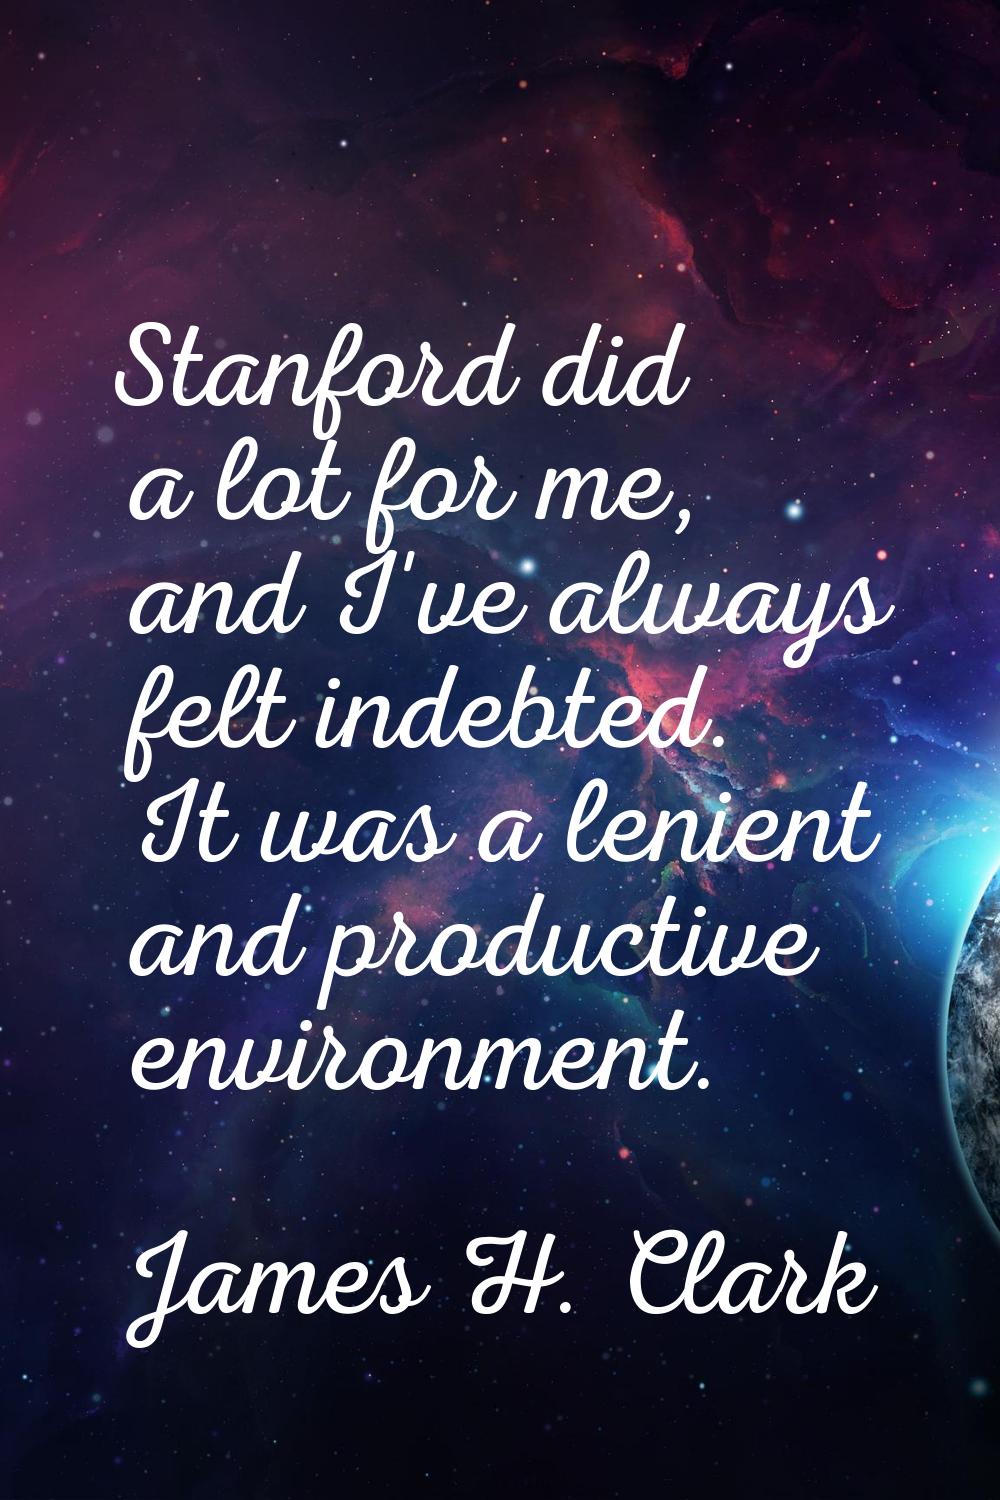 Stanford did a lot for me, and I've always felt indebted. It was a lenient and productive environme